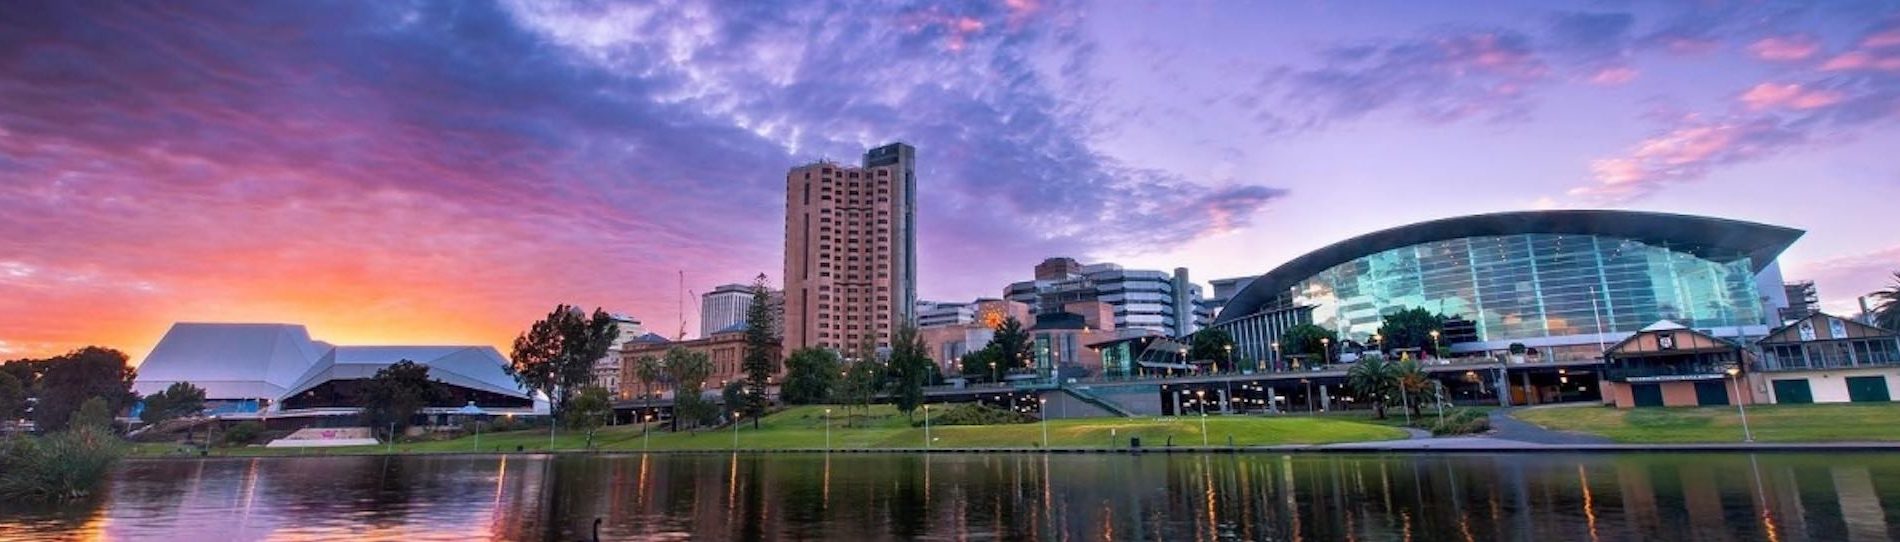 city landscape of adelaide with sun setting